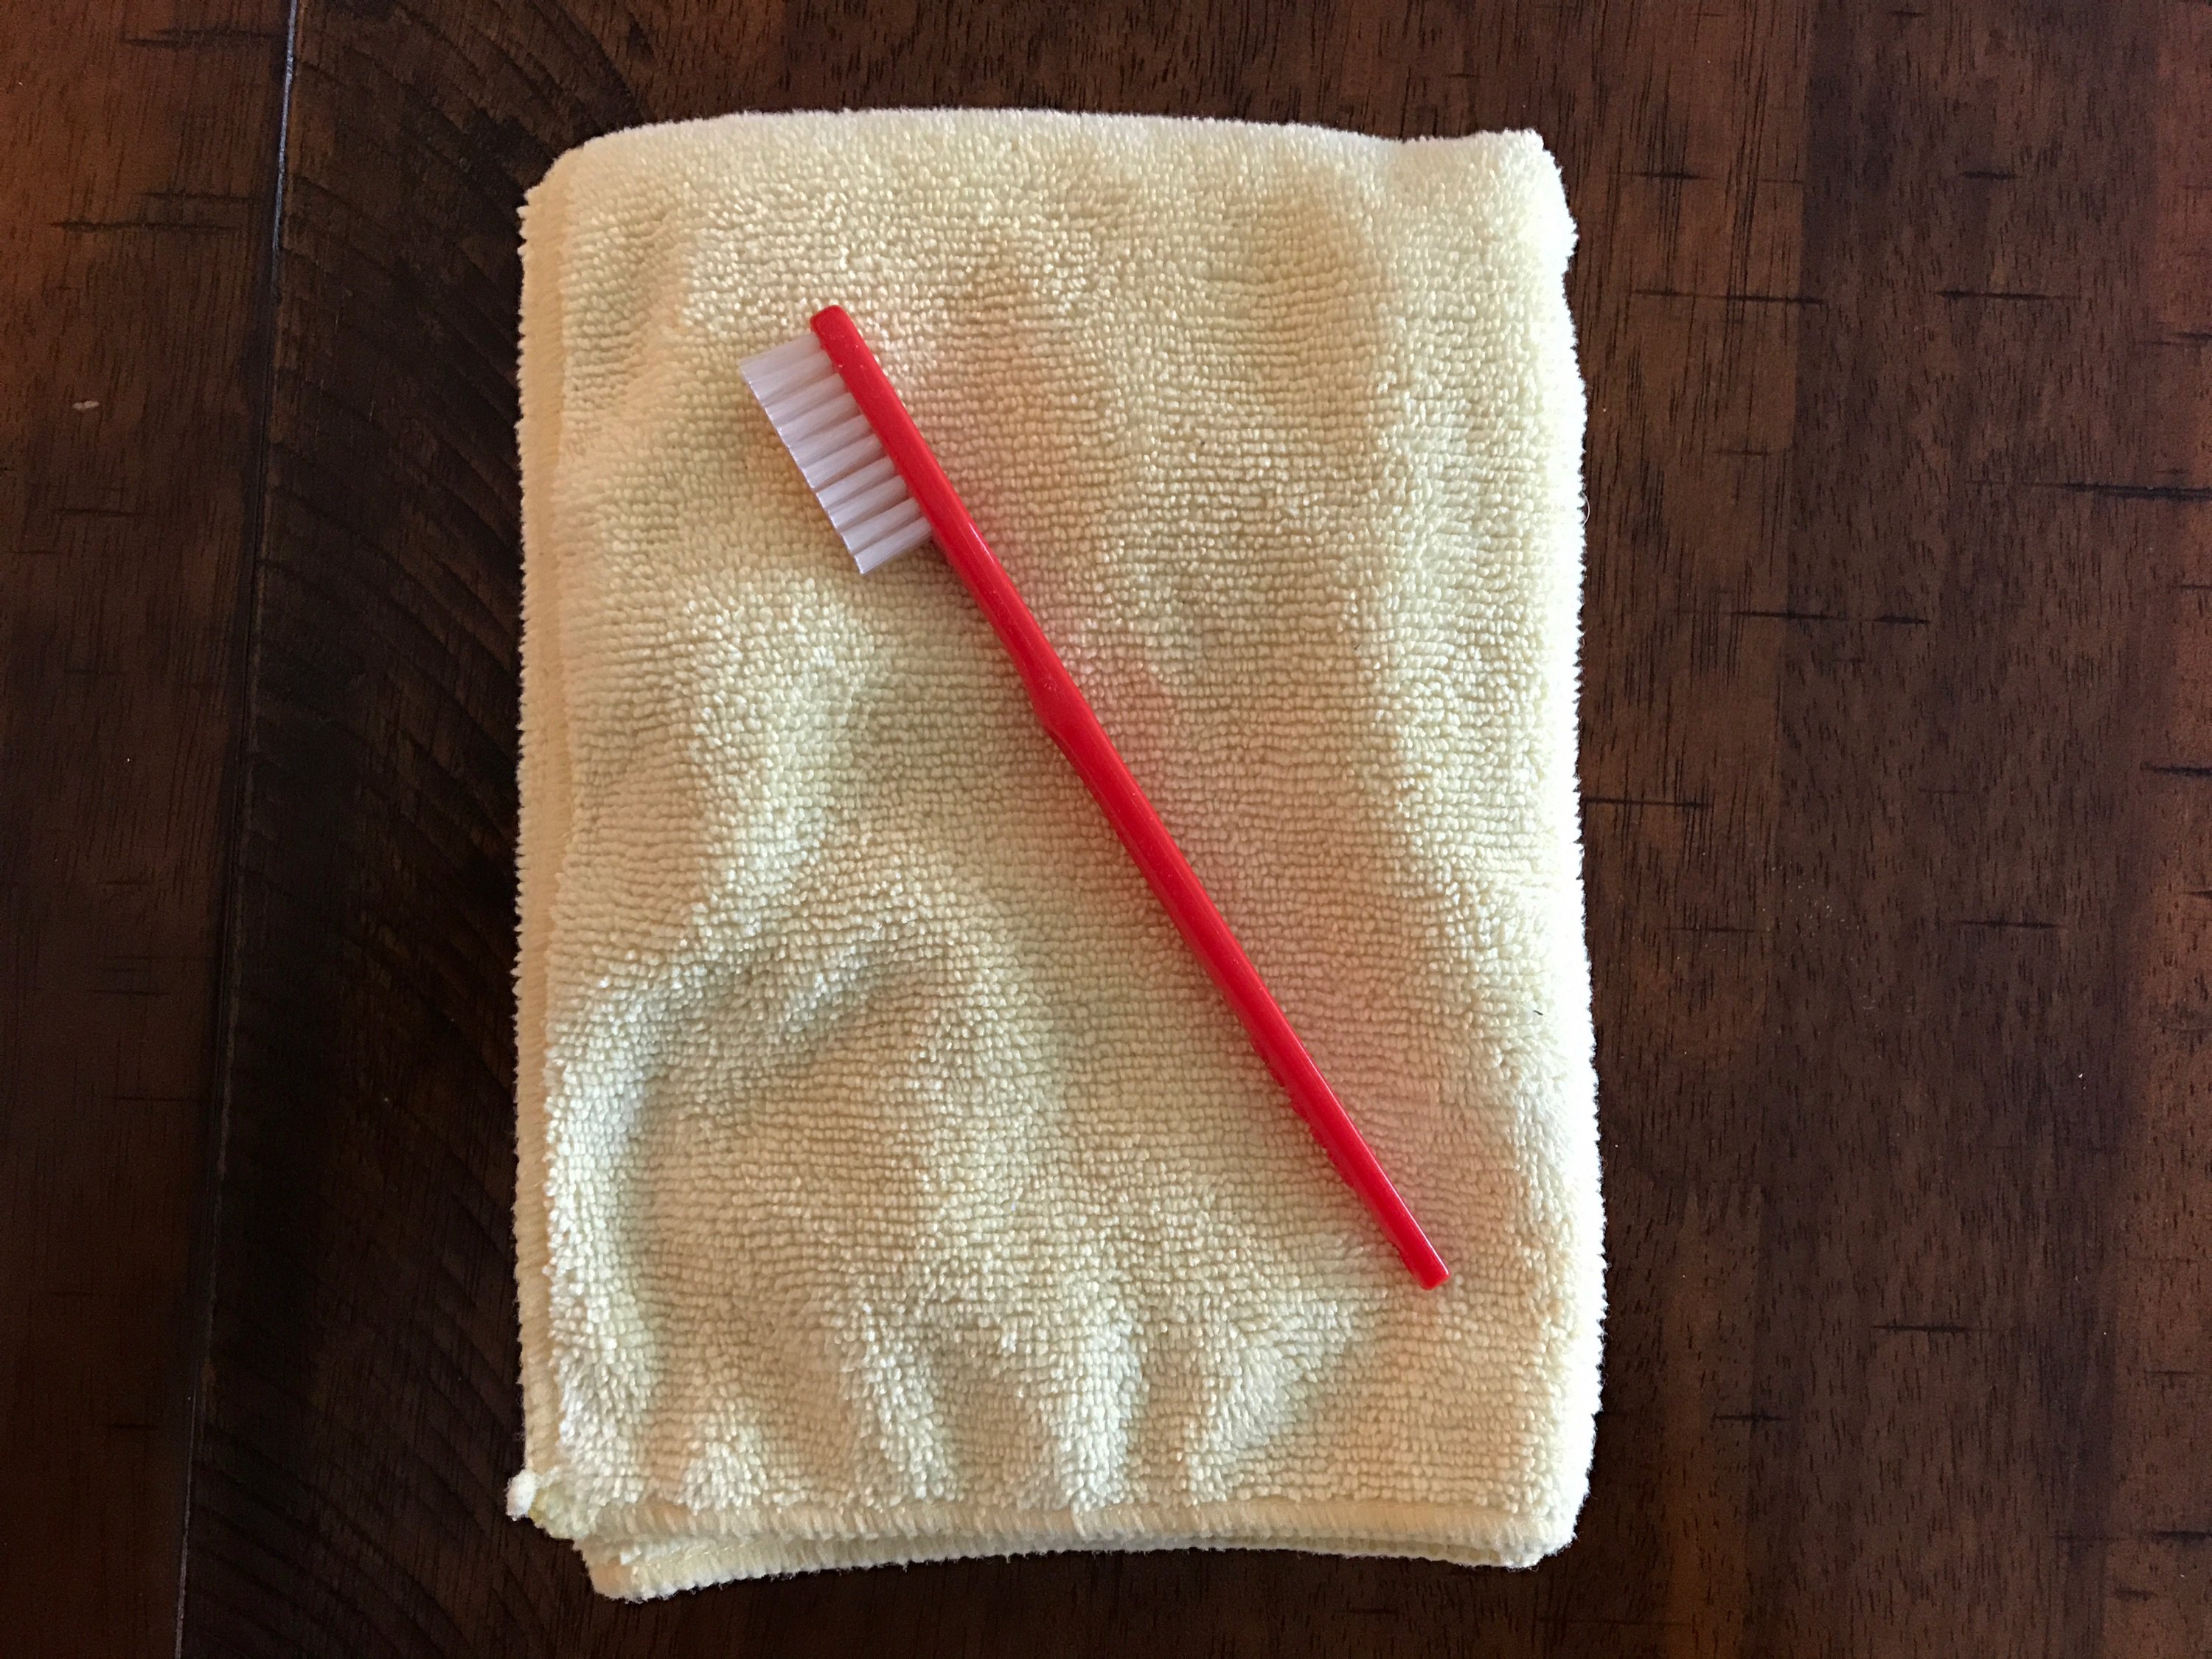 microfiber cloth and toothbrush